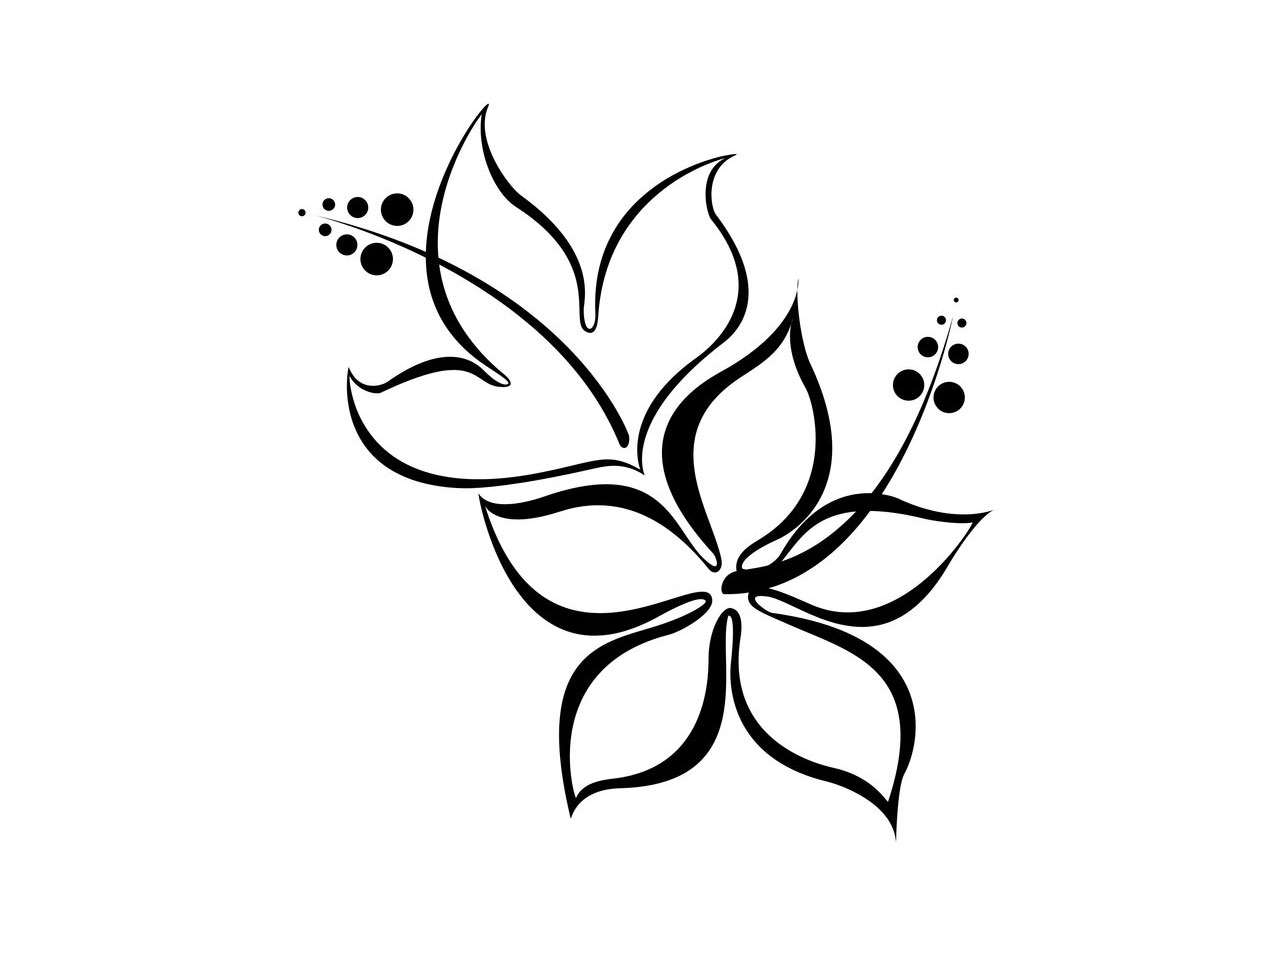 Flowers Drawings Basic - ClipArt Best